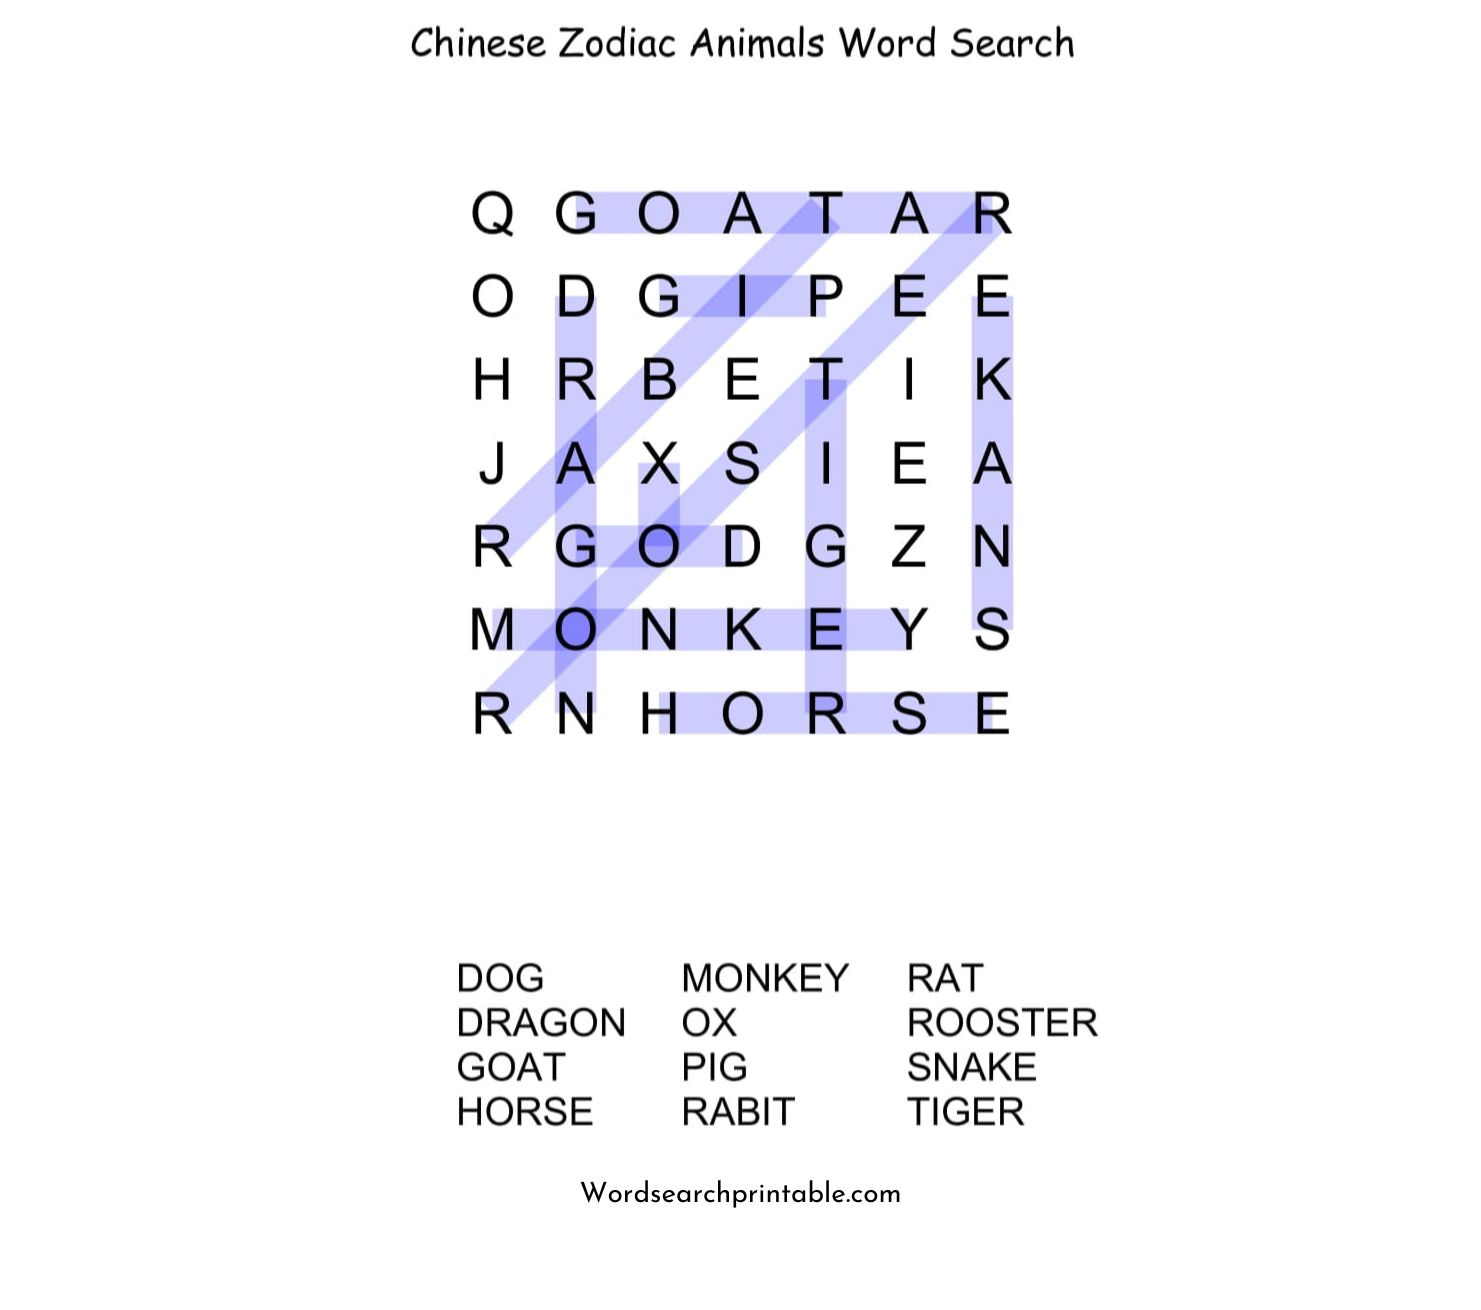 chinese zodiac animals word search puzzle solution